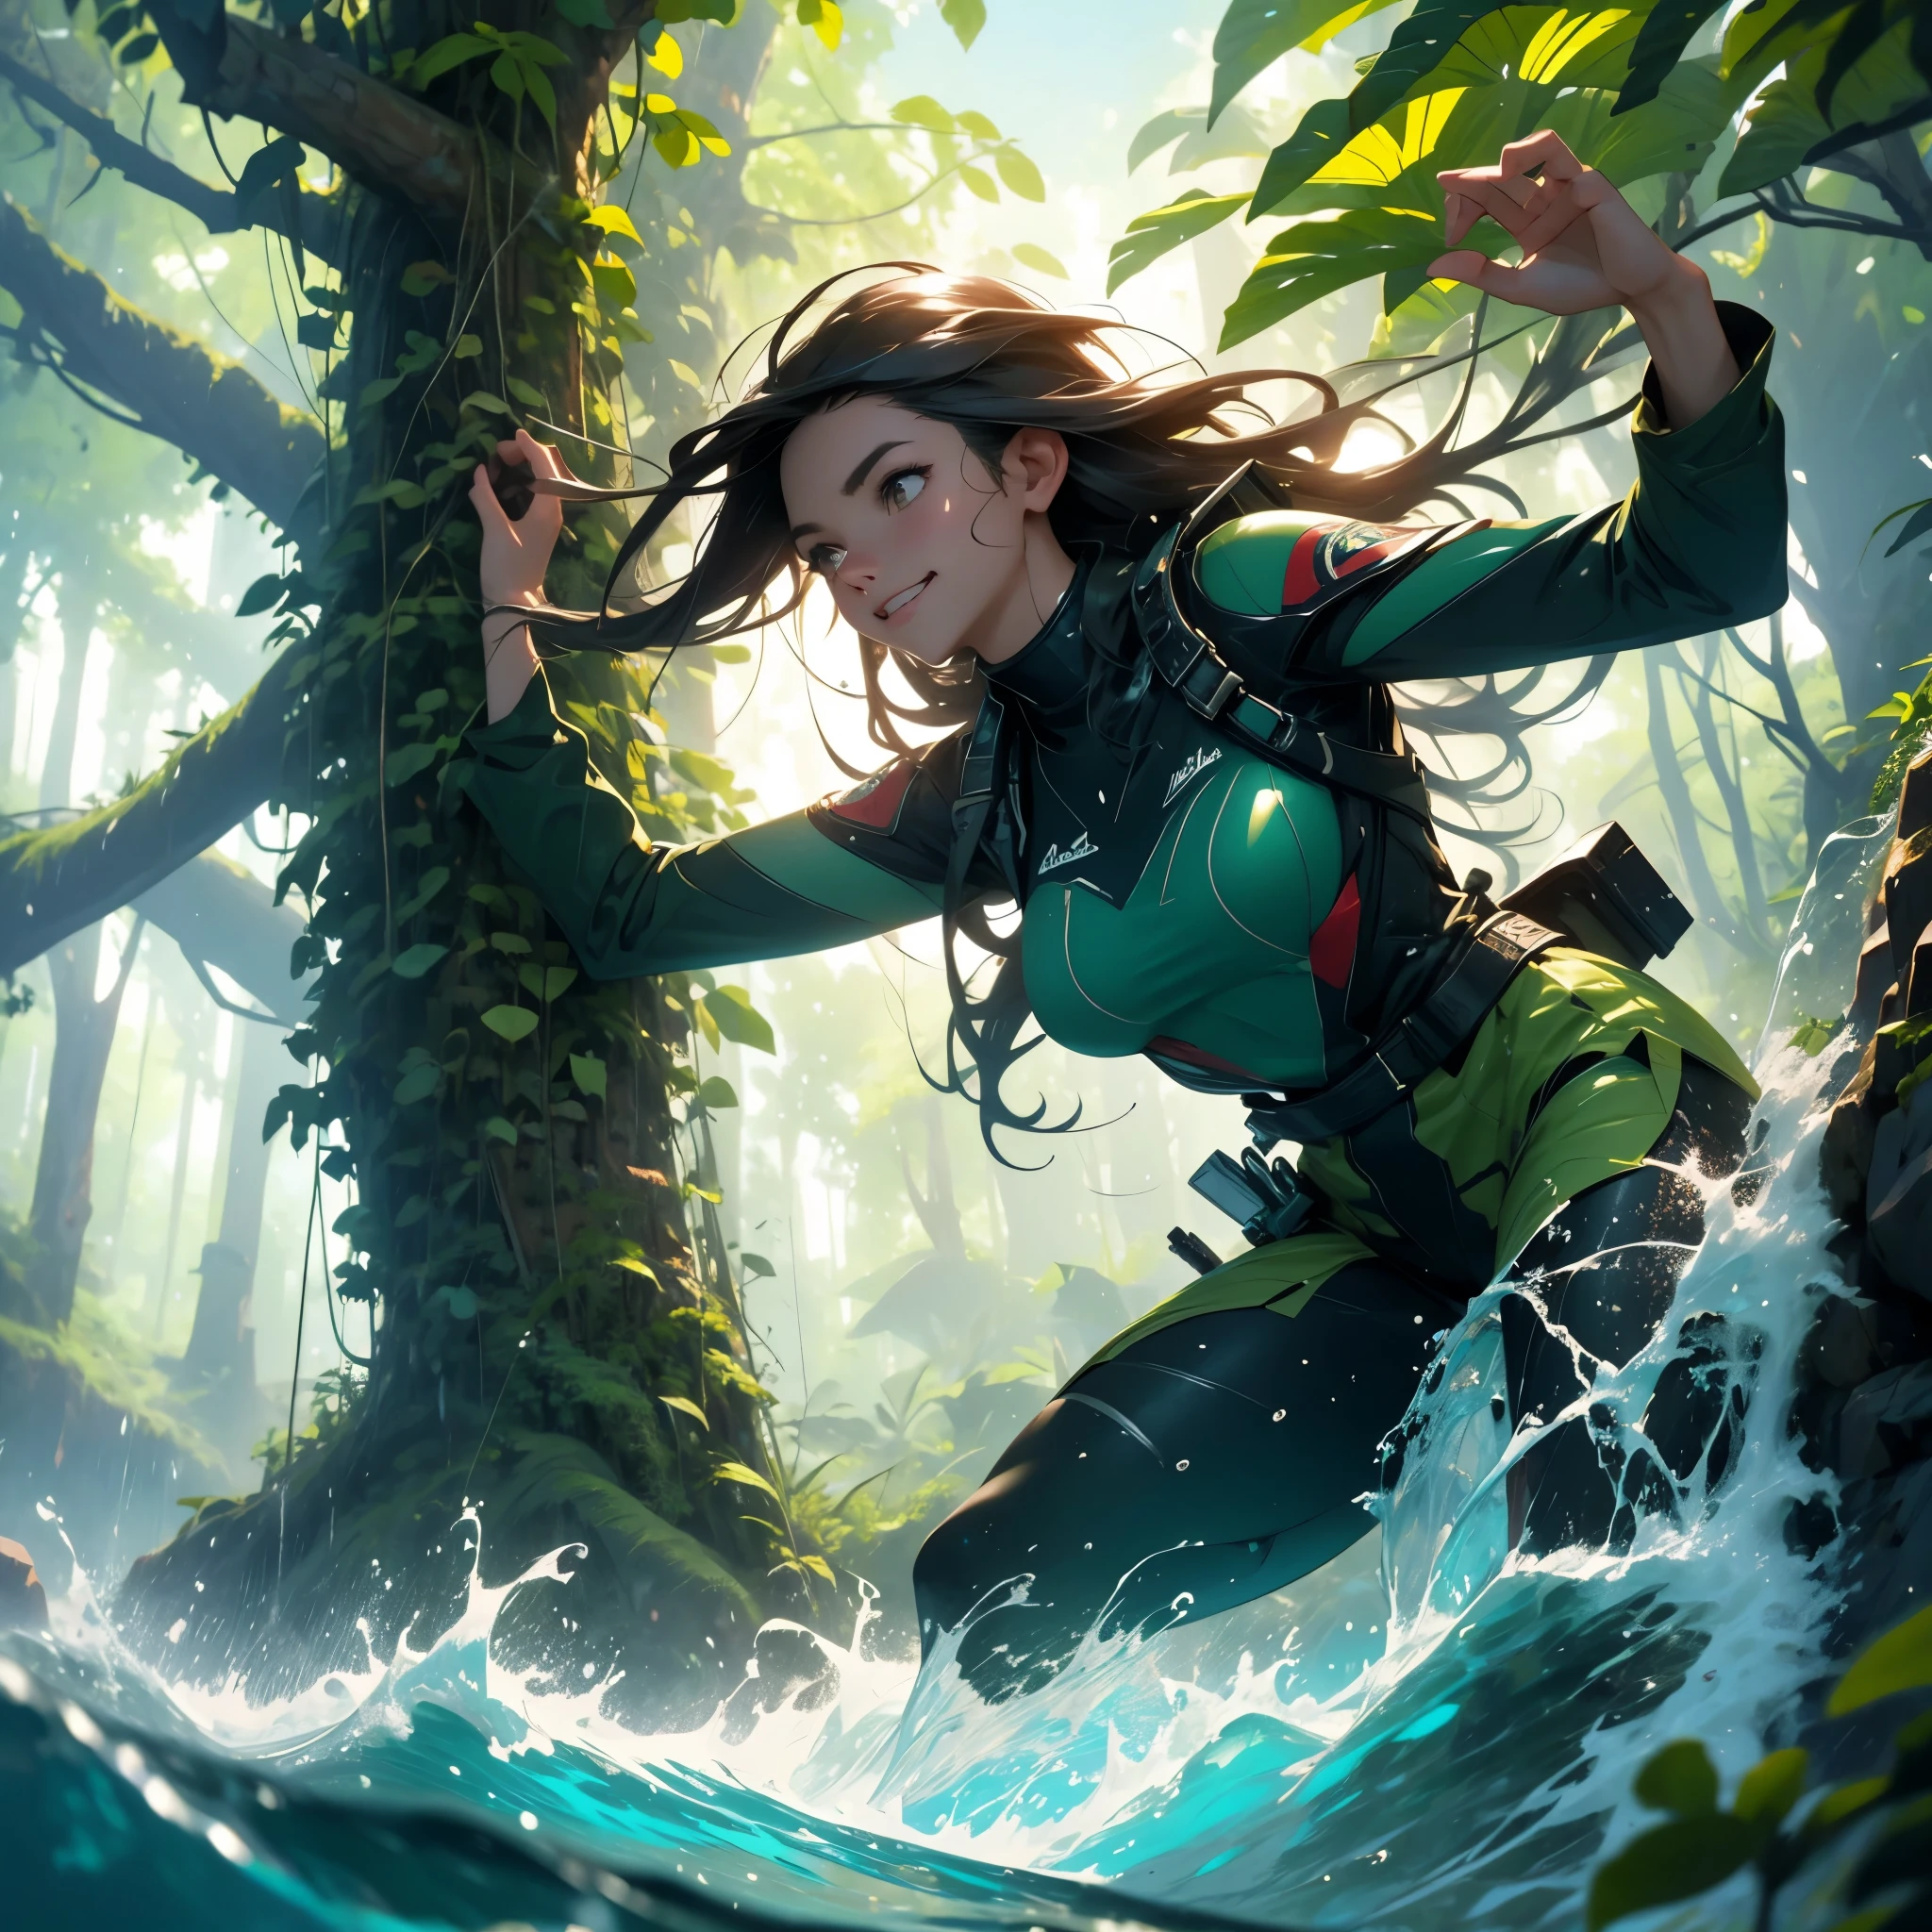 A brave Australian adventurer woman,diving,high waterfall,deep lake,[escaping],cannibals,pursuing [her],adrenaline rush [in the air],splashing water,fearless smile,breathtaking dive,and [surface] re-emerges,strong,[confident],and [determined]. Material: [Photorealistic,ultra-detailed],fine art,oil painting. Scene details: Lush green rainforest surrounding the waterfall,mist rising from the crashing water,thick vines hanging from the trees,exotic birds chirping loudly. Image quality: (Best quality,4k,8k,highres,masterpiece:1.2),ultra-detailed,realistic,HDR,sharp focus,physically-based rendering,vivid colors. Art style: Adventure,action,landscape. Color tone: Vibrant and rich with contrasts.